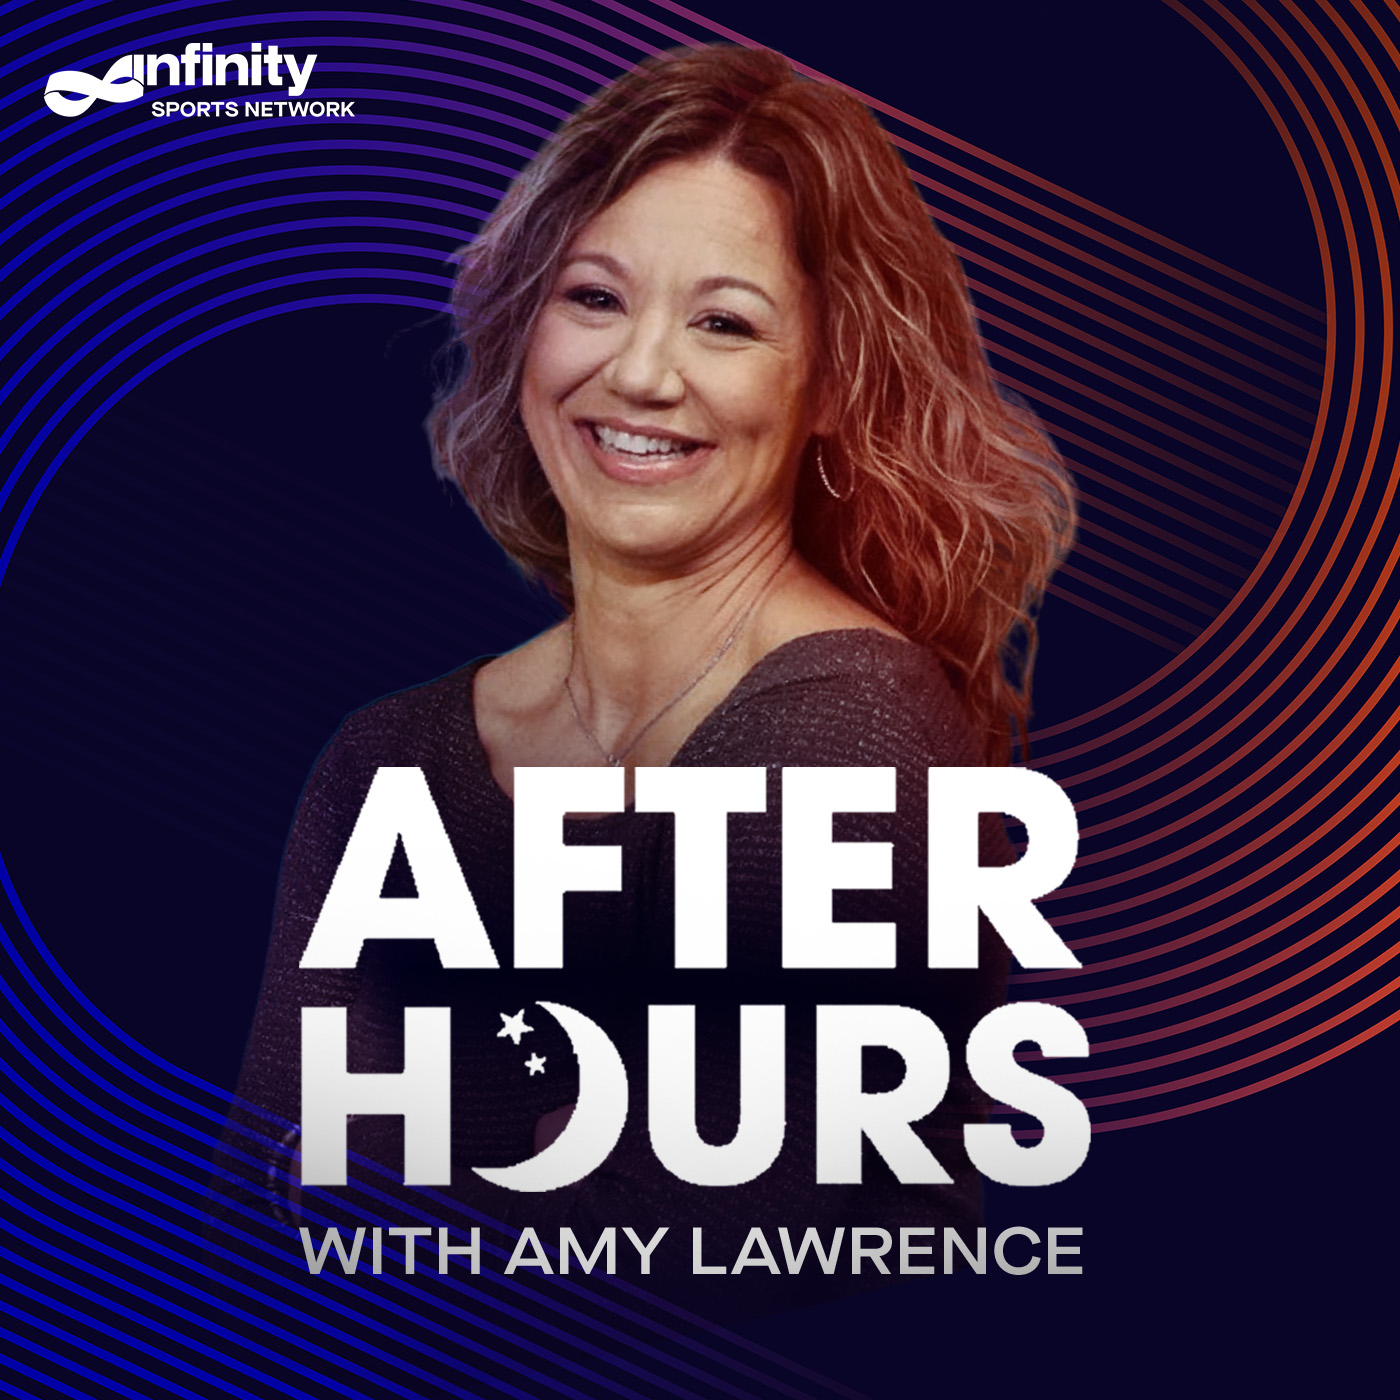 11-9-21 After Hours with Amy Lawrence PODCAST: Hour 2